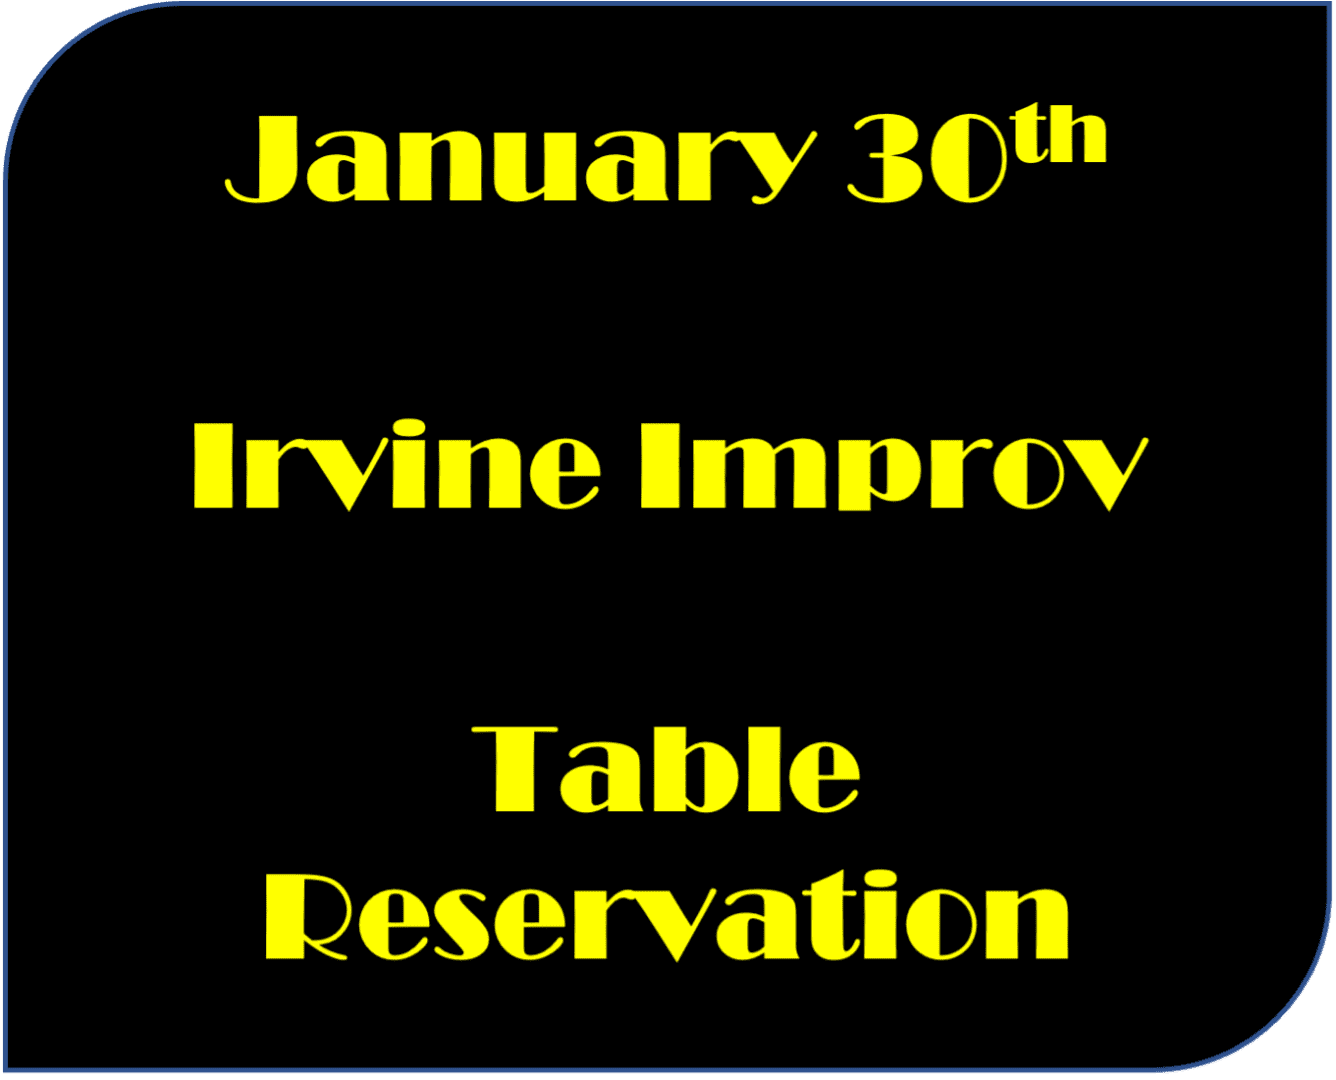 January 30 table reservation poster